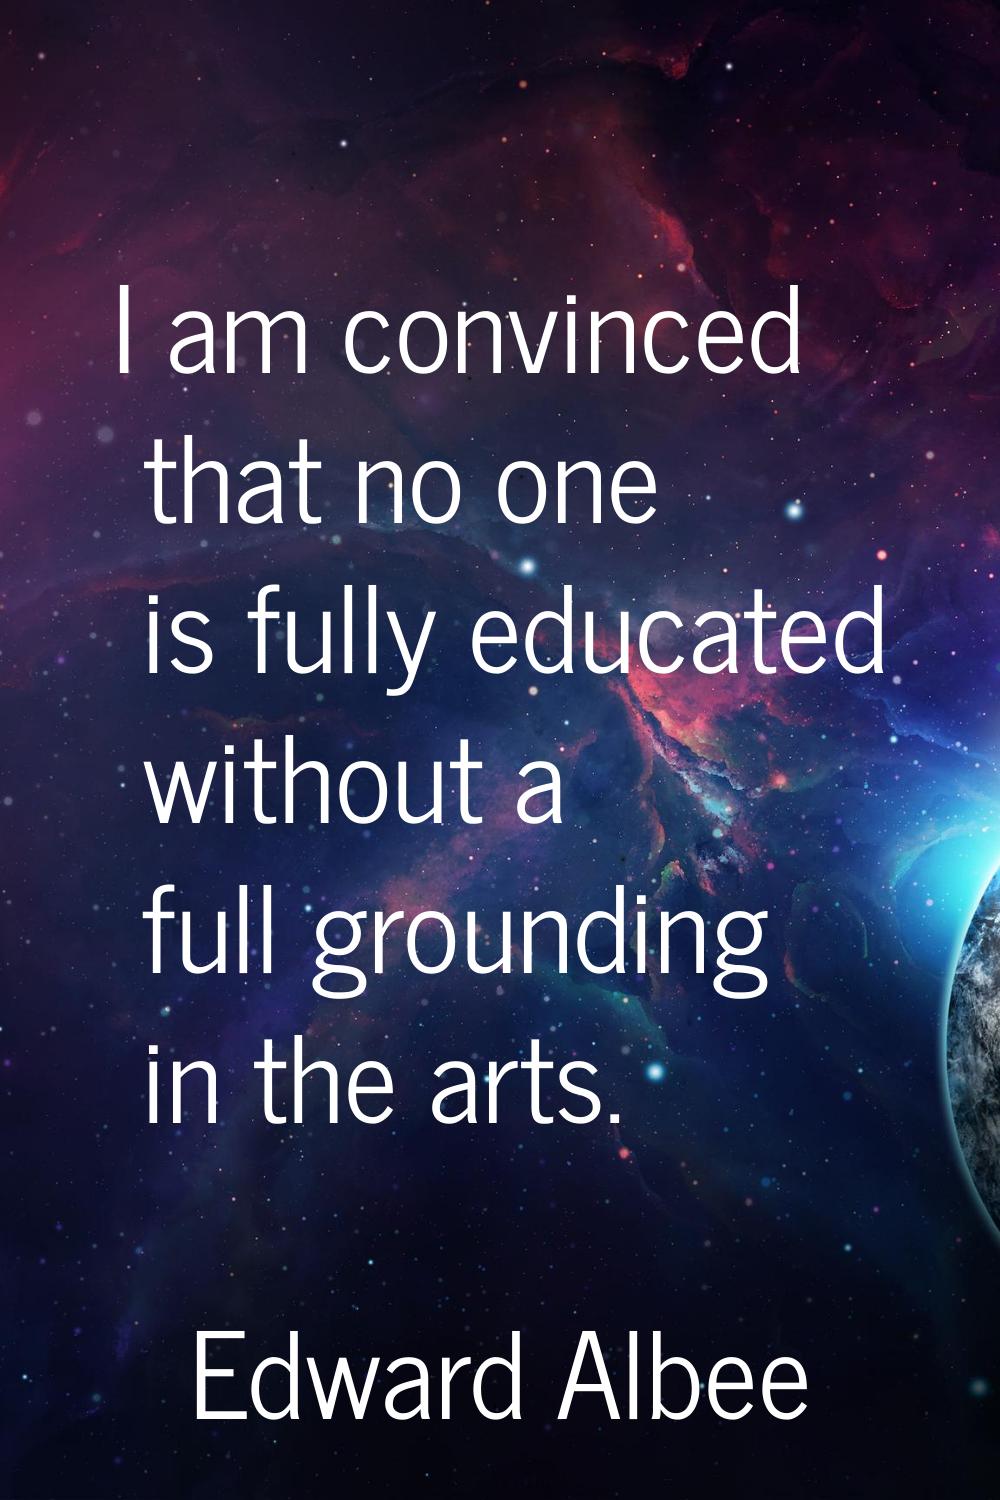 I am convinced that no one is fully educated without a full grounding in the arts.